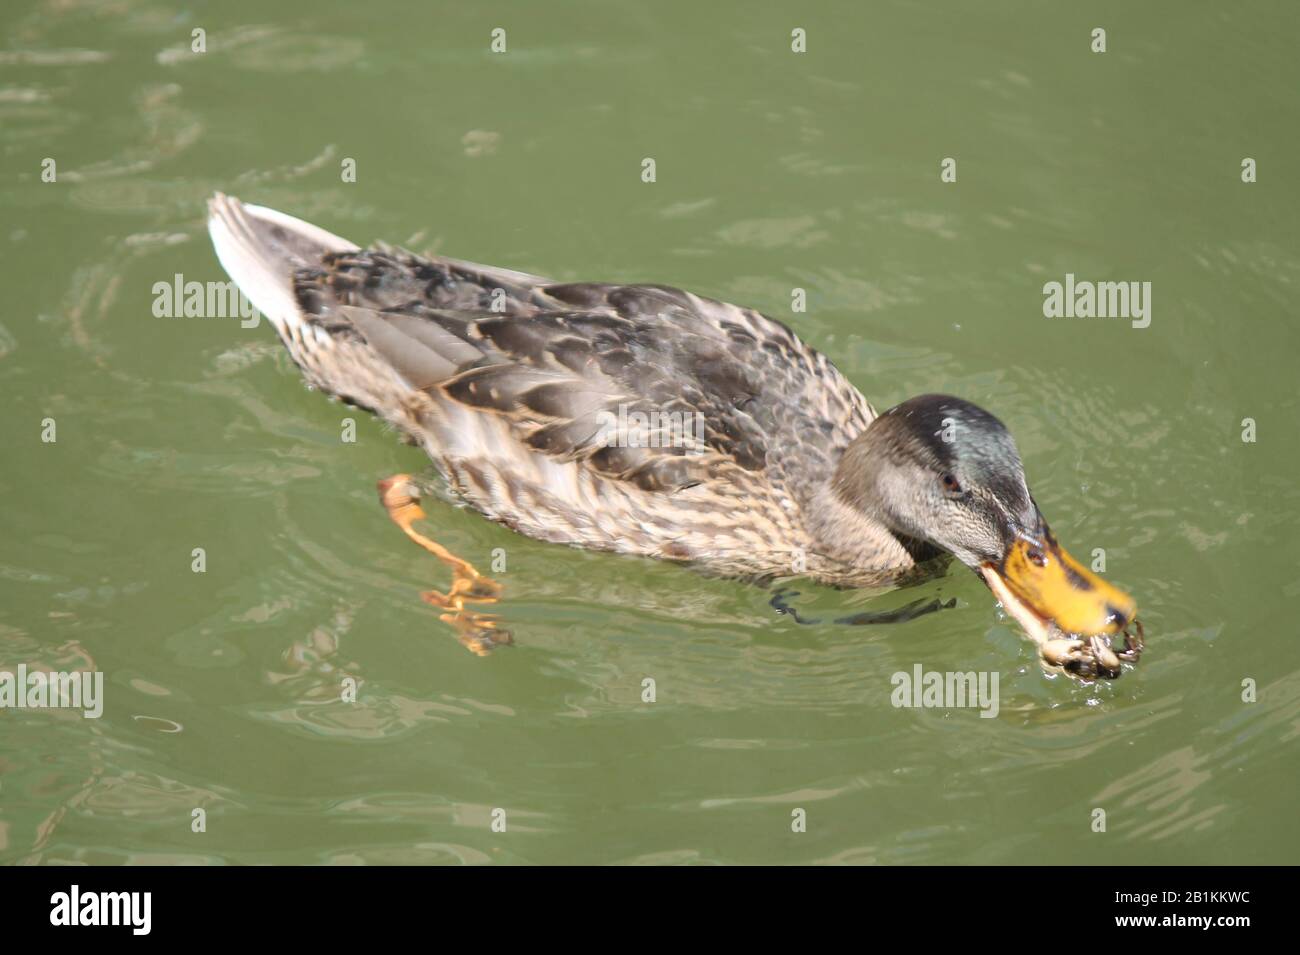 duck holding a crab in its beak Stock Photo